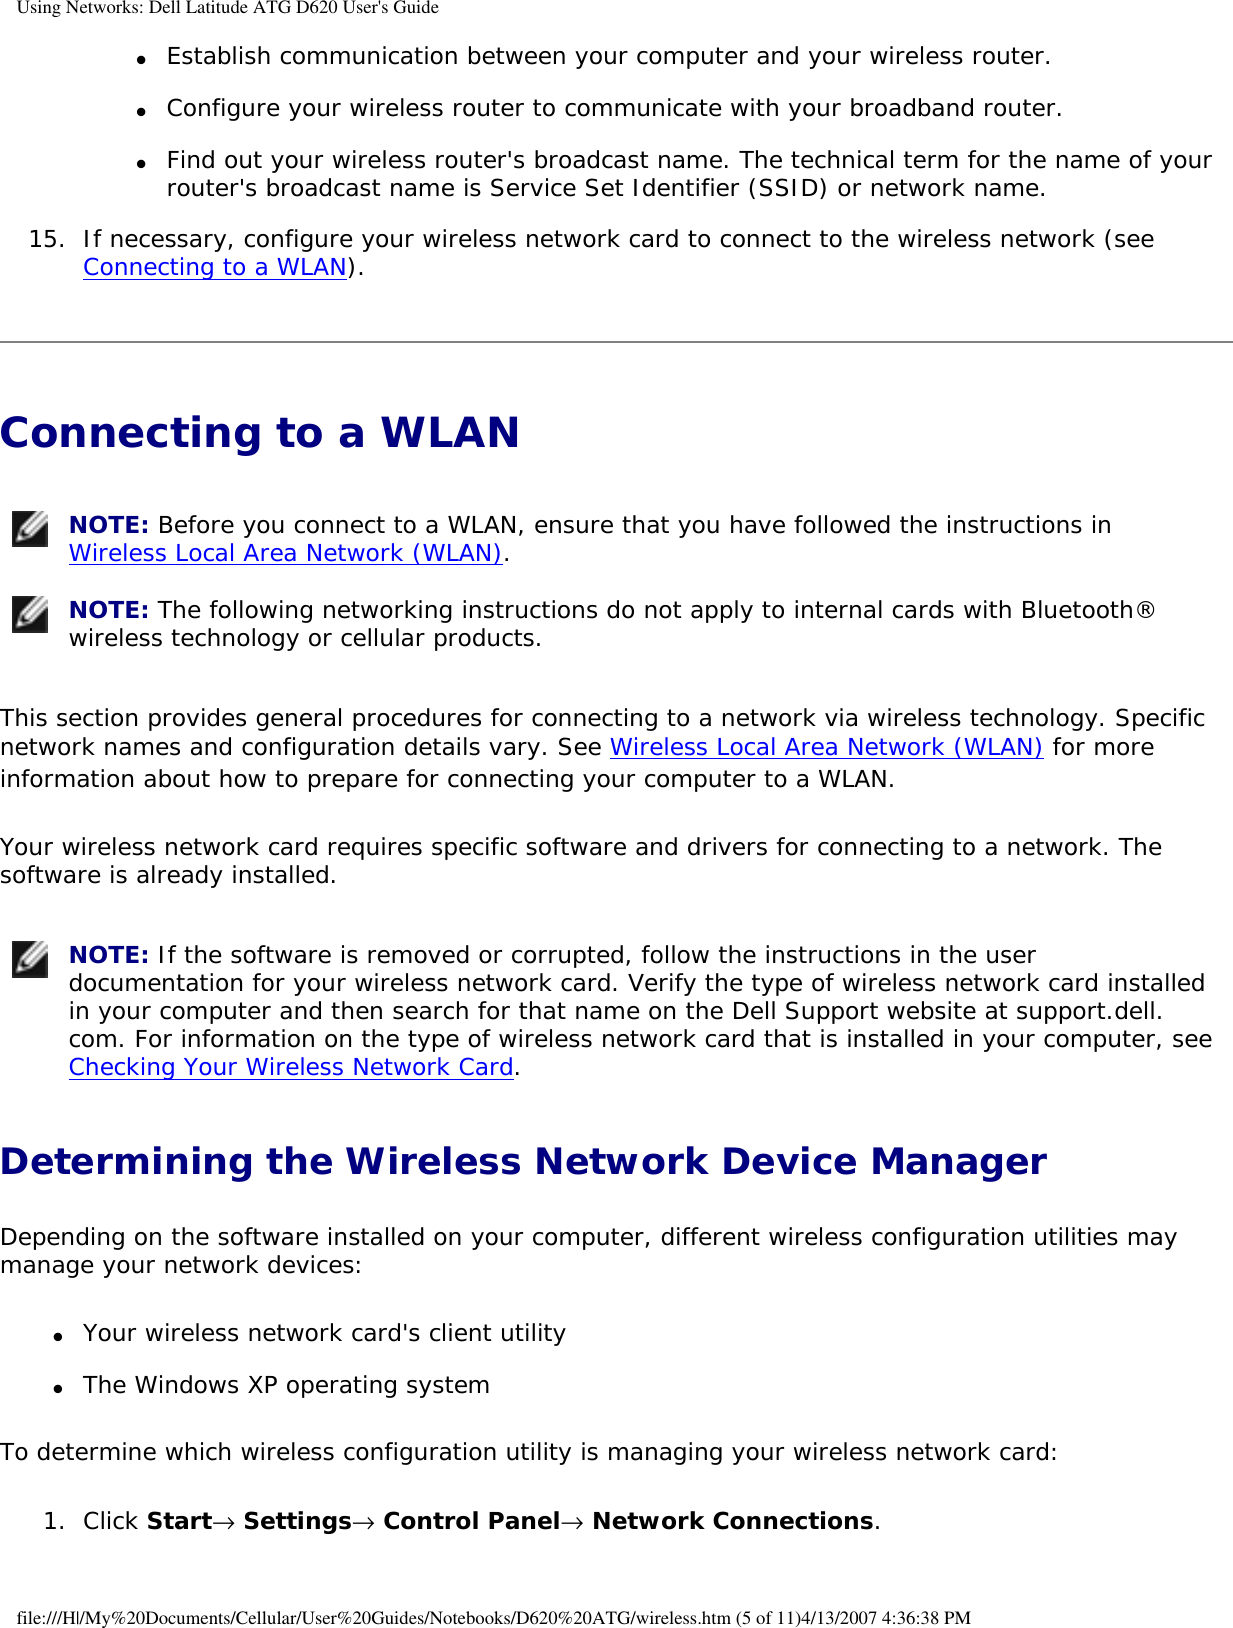 Using Networks: Dell Latitude ATG D620 User&apos;s Guide●     Establish communication between your computer and your wireless router.  ●     Configure your wireless router to communicate with your broadband router.  ●     Find out your wireless router&apos;s broadcast name. The technical term for the name of your router&apos;s broadcast name is Service Set Identifier (SSID) or network name.  15.  If necessary, configure your wireless network card to connect to the wireless network (see Connecting to a WLAN).   Connecting to a WLAN  NOTE: Before you connect to a WLAN, ensure that you have followed the instructions in Wireless Local Area Network (WLAN).  NOTE: The following networking instructions do not apply to internal cards with Bluetooth® wireless technology or cellular products. This section provides general procedures for connecting to a network via wireless technology. Specific network names and configuration details vary. See Wireless Local Area Network (WLAN) for more information about how to prepare for connecting your computer to a WLAN. Your wireless network card requires specific software and drivers for connecting to a network. The software is already installed.  NOTE: If the software is removed or corrupted, follow the instructions in the user documentation for your wireless network card. Verify the type of wireless network card installed in your computer and then search for that name on the Dell Support website at support.dell.com. For information on the type of wireless network card that is installed in your computer, see Checking Your Wireless Network Card. Determining the Wireless Network Device ManagerDepending on the software installed on your computer, different wireless configuration utilities may manage your network devices:●     Your wireless network card&apos;s client utility  ●     The Windows XP operating system  To determine which wireless configuration utility is managing your wireless network card:1.  Click Start→ Settings→ Control Panel→ Network Connections.   file:///H|/My%20Documents/Cellular/User%20Guides/Notebooks/D620%20ATG/wireless.htm (5 of 11)4/13/2007 4:36:38 PM